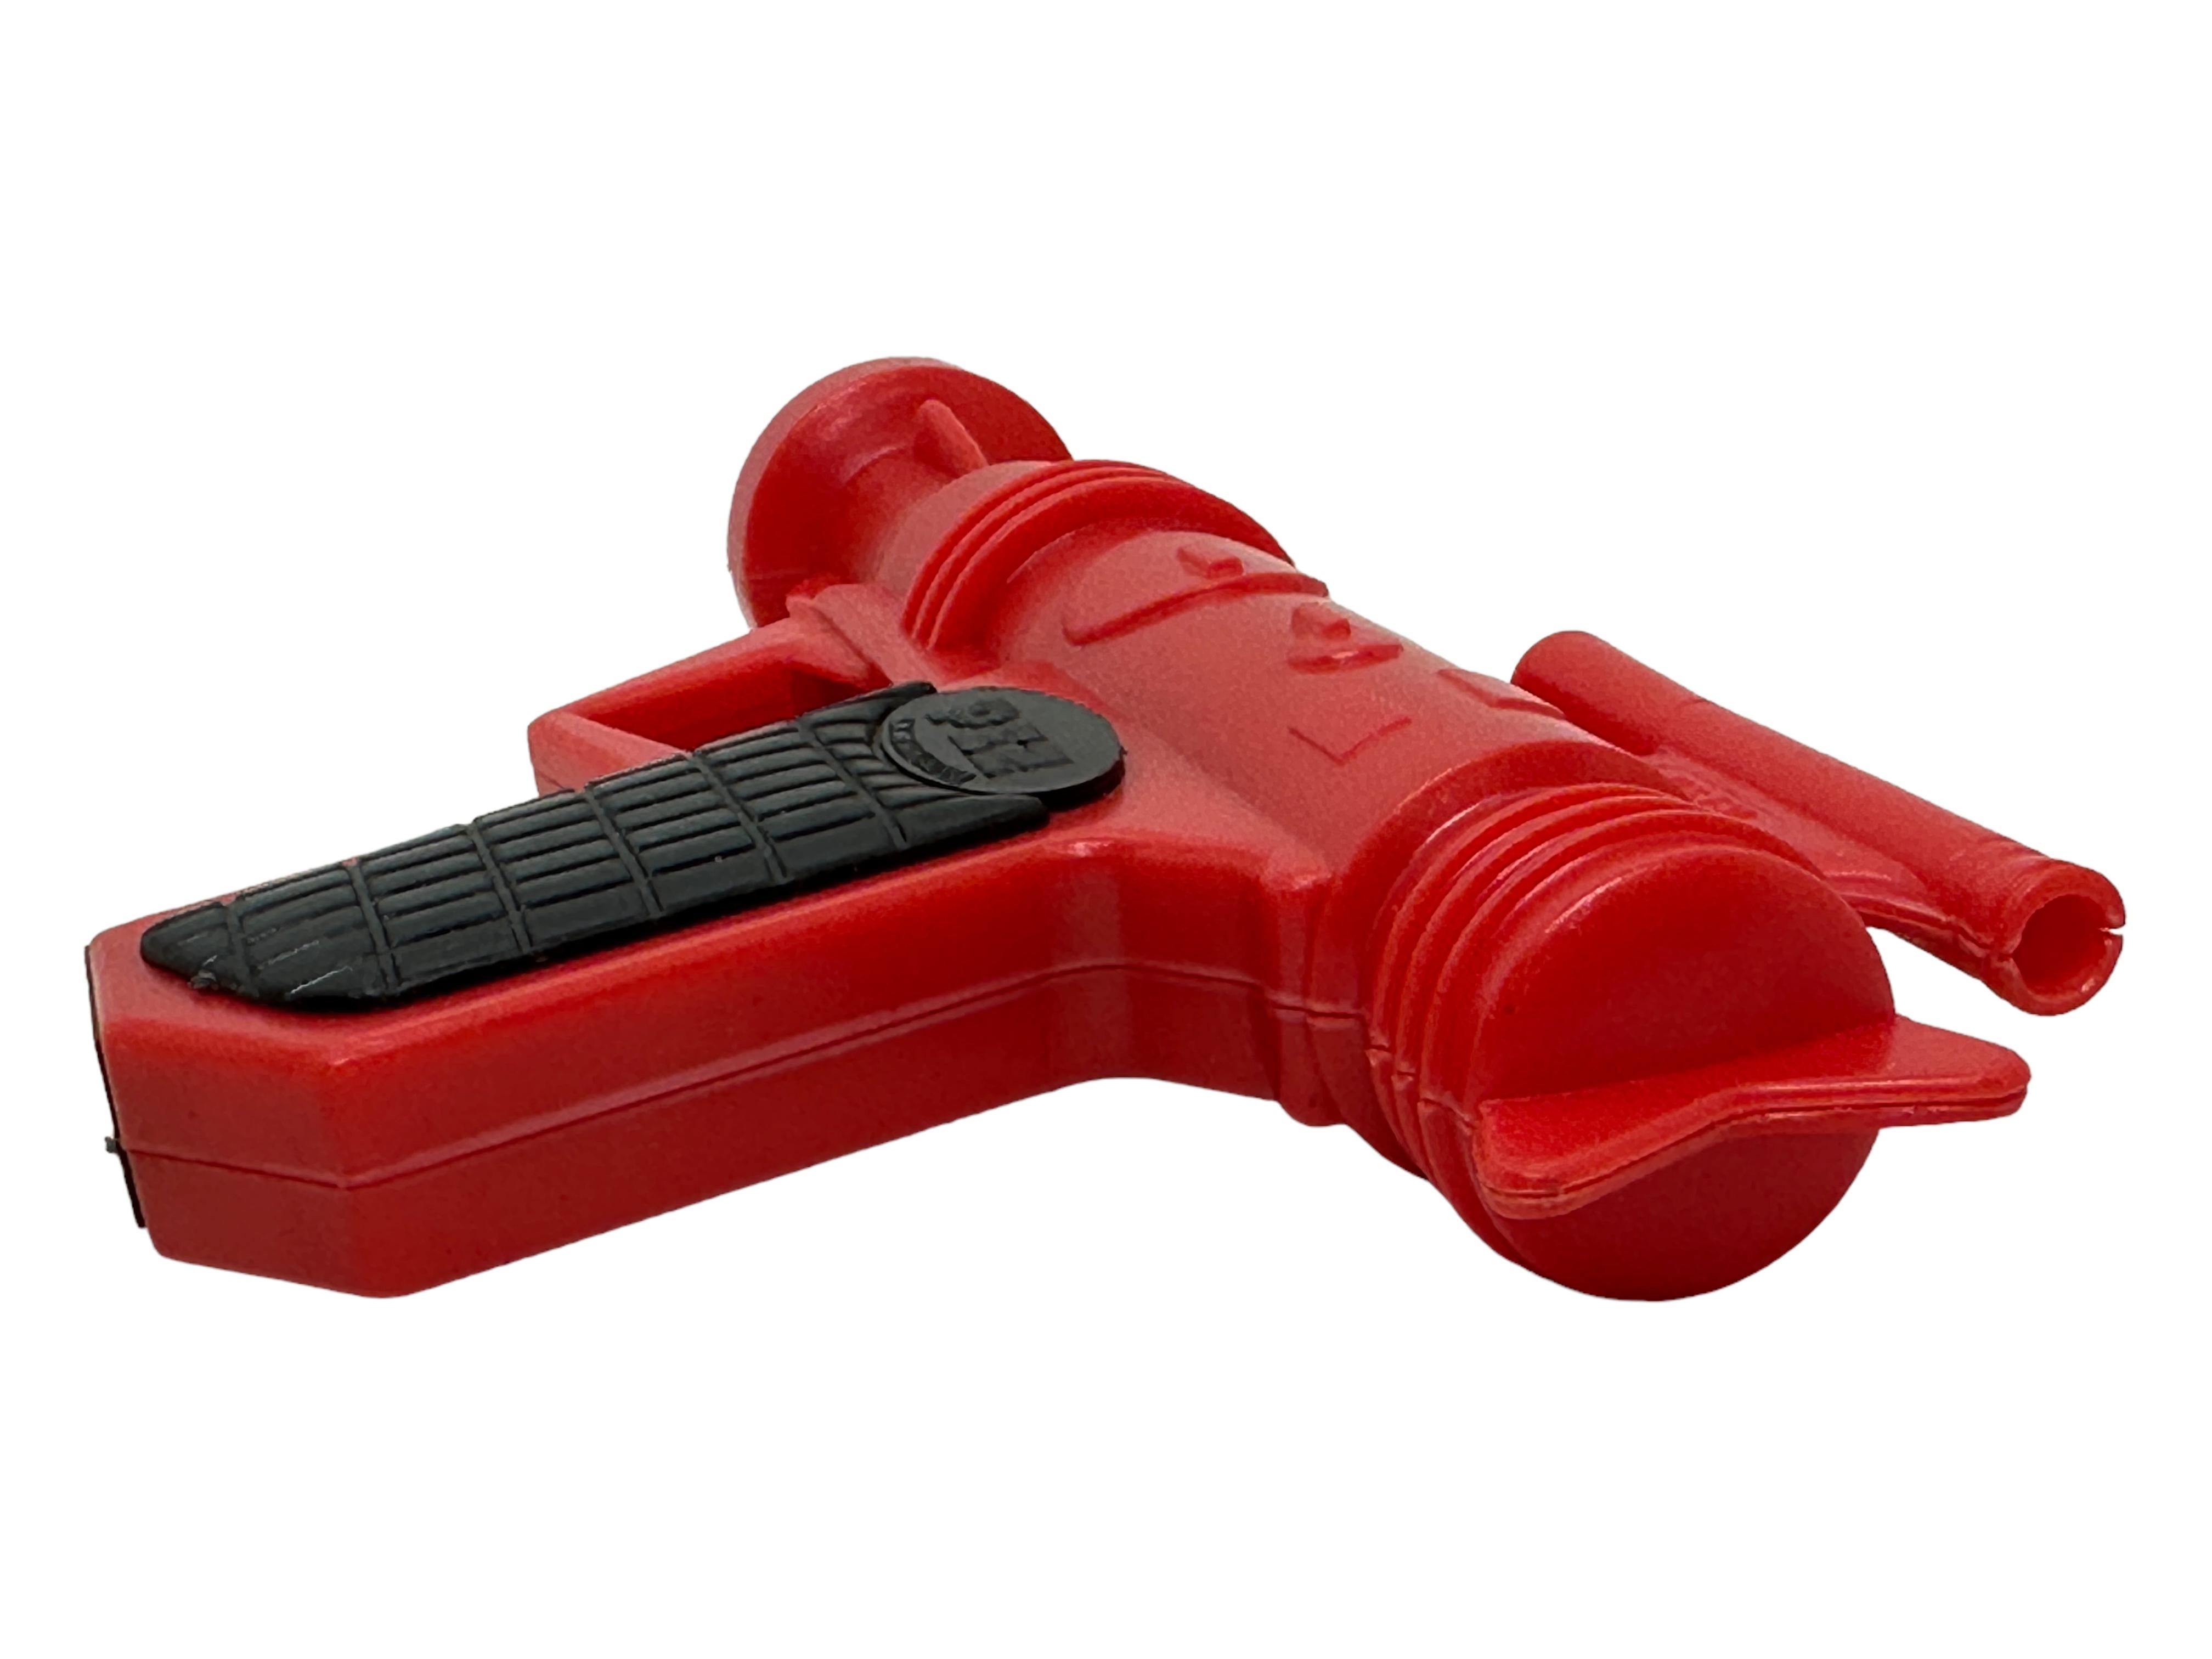 Late 20th Century 1980s Vintage Red PEZ Space Gun Candy Dispenser U. S. Pat. 3.370.746 For Sale